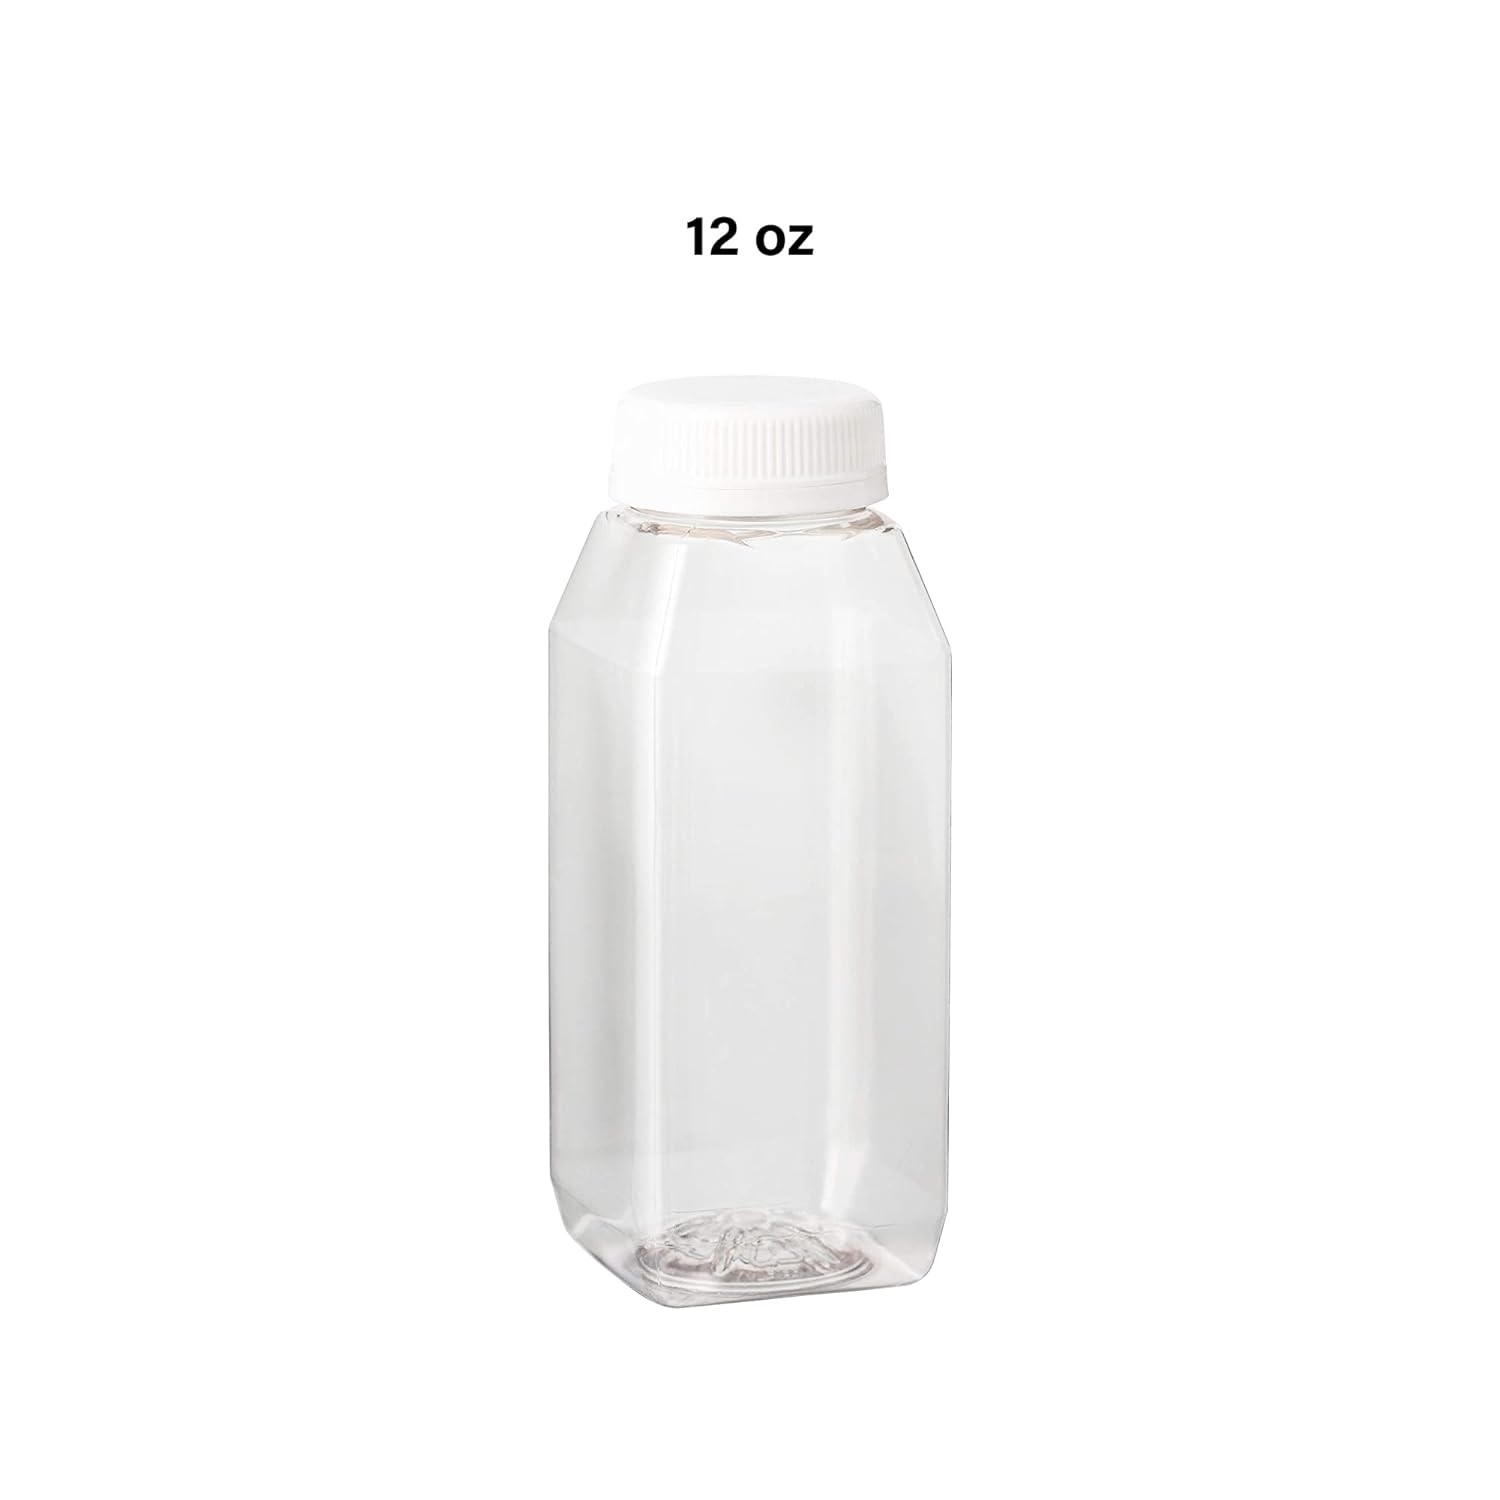 40 PACK] 12 OZ Clear Square Plastic Juice Bottles with Tamper Evident Caps  - Cold Pressed - Smoothie Bottles - Ideal for Juices, Milk, Smoothies,  Picnic's, Meal Prep Juice Containers by EcoQuality 